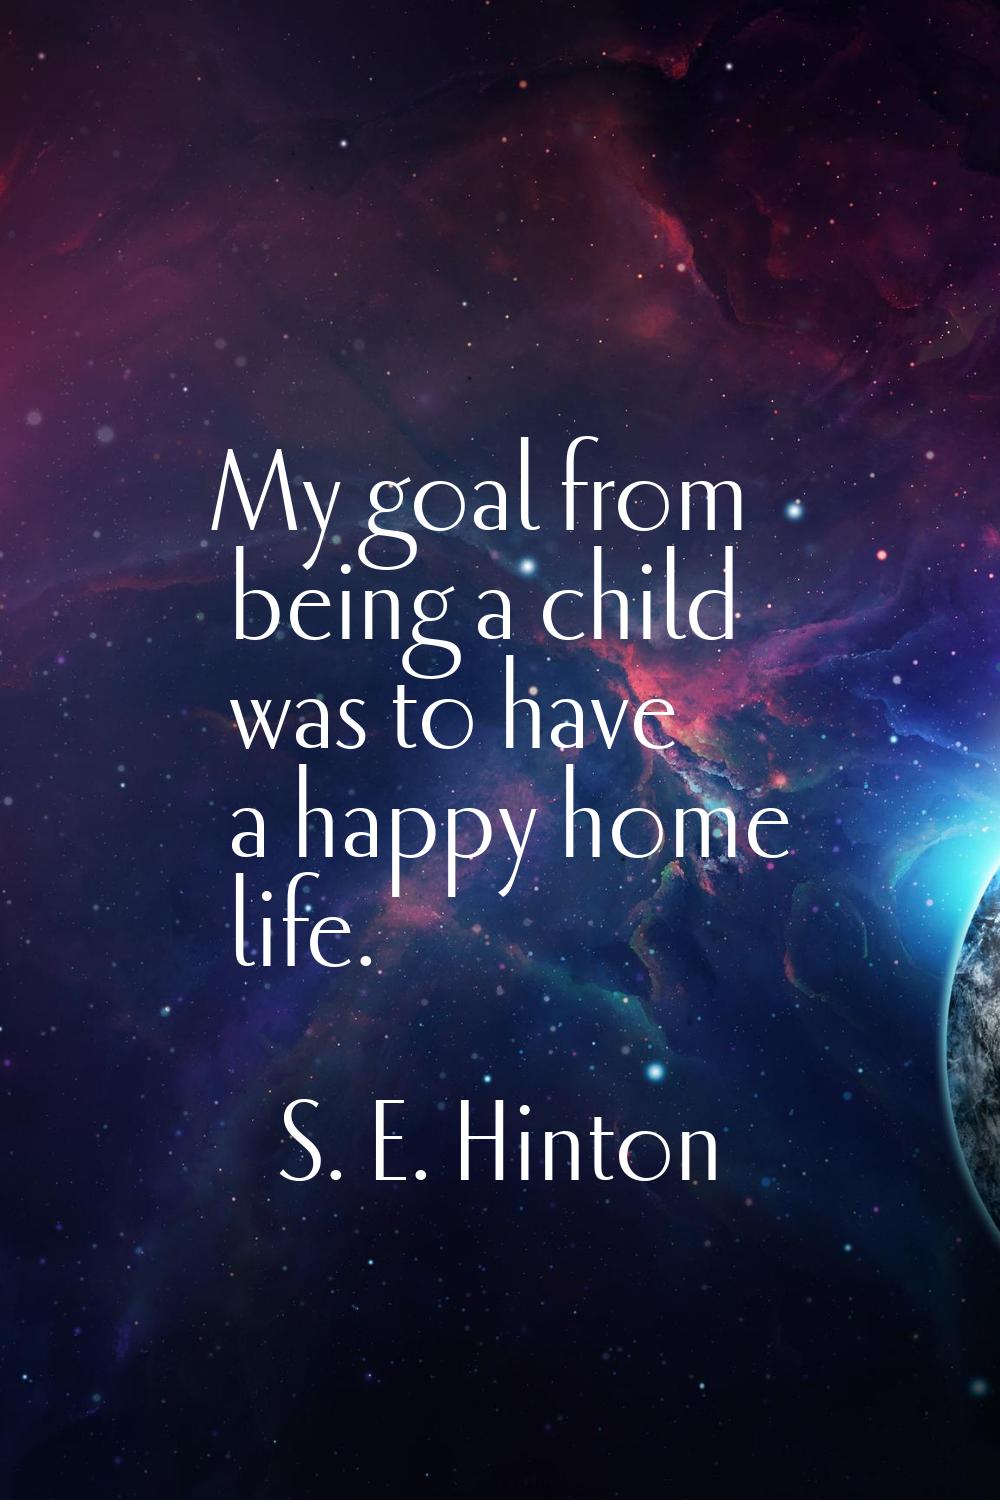 My goal from being a child was to have a happy home life.